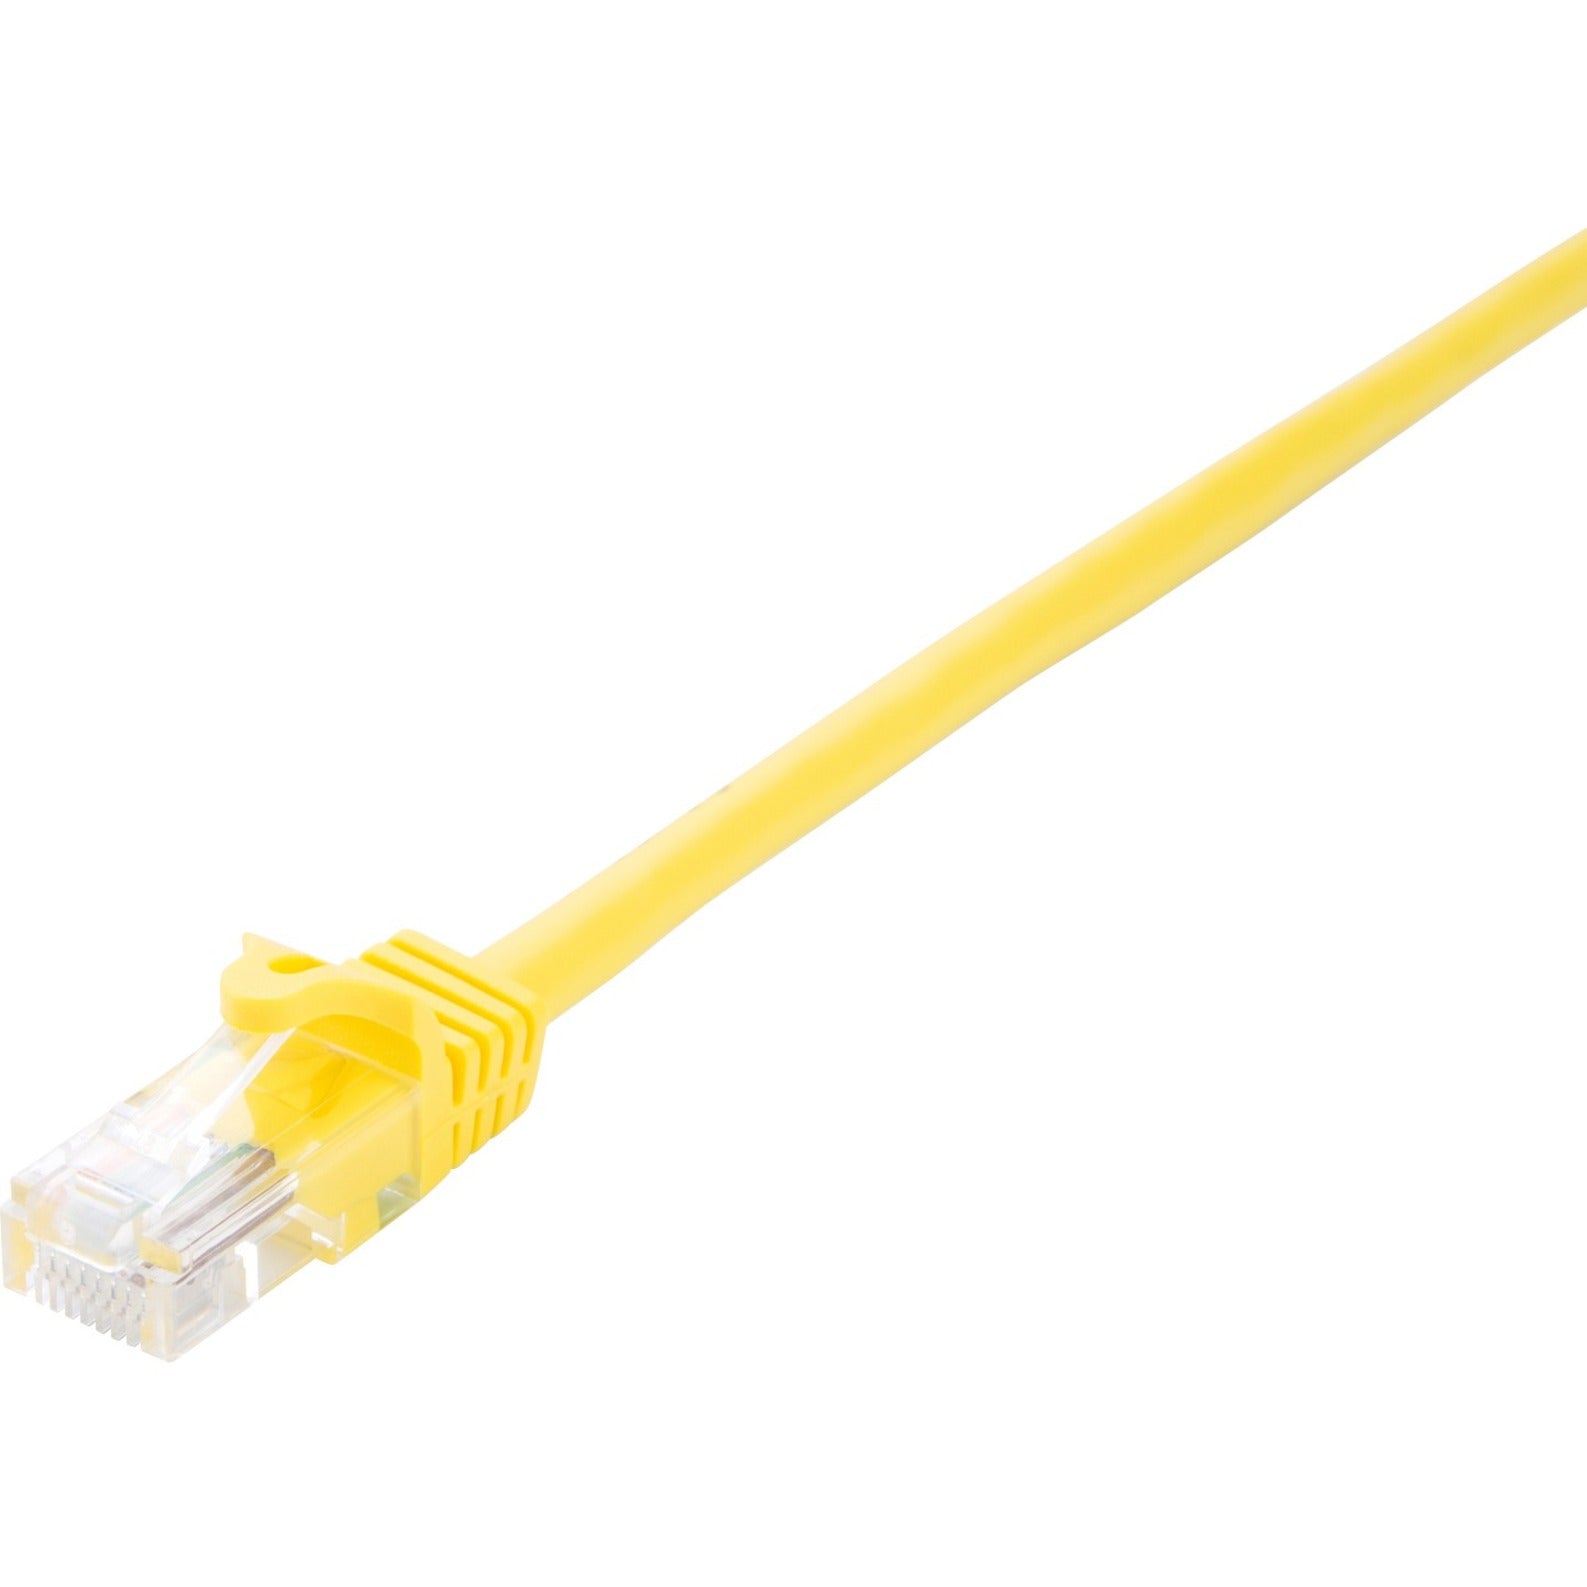 V7 V7CAT6UTP-50C-YLW-1N Yellow Cat6 Unshielded (UTP) Cable RJ45 Male to RJ45 Male 0.5m 1.6ft, 1 Gbit/s Data Transfer Rate, Gold Plated Connectors